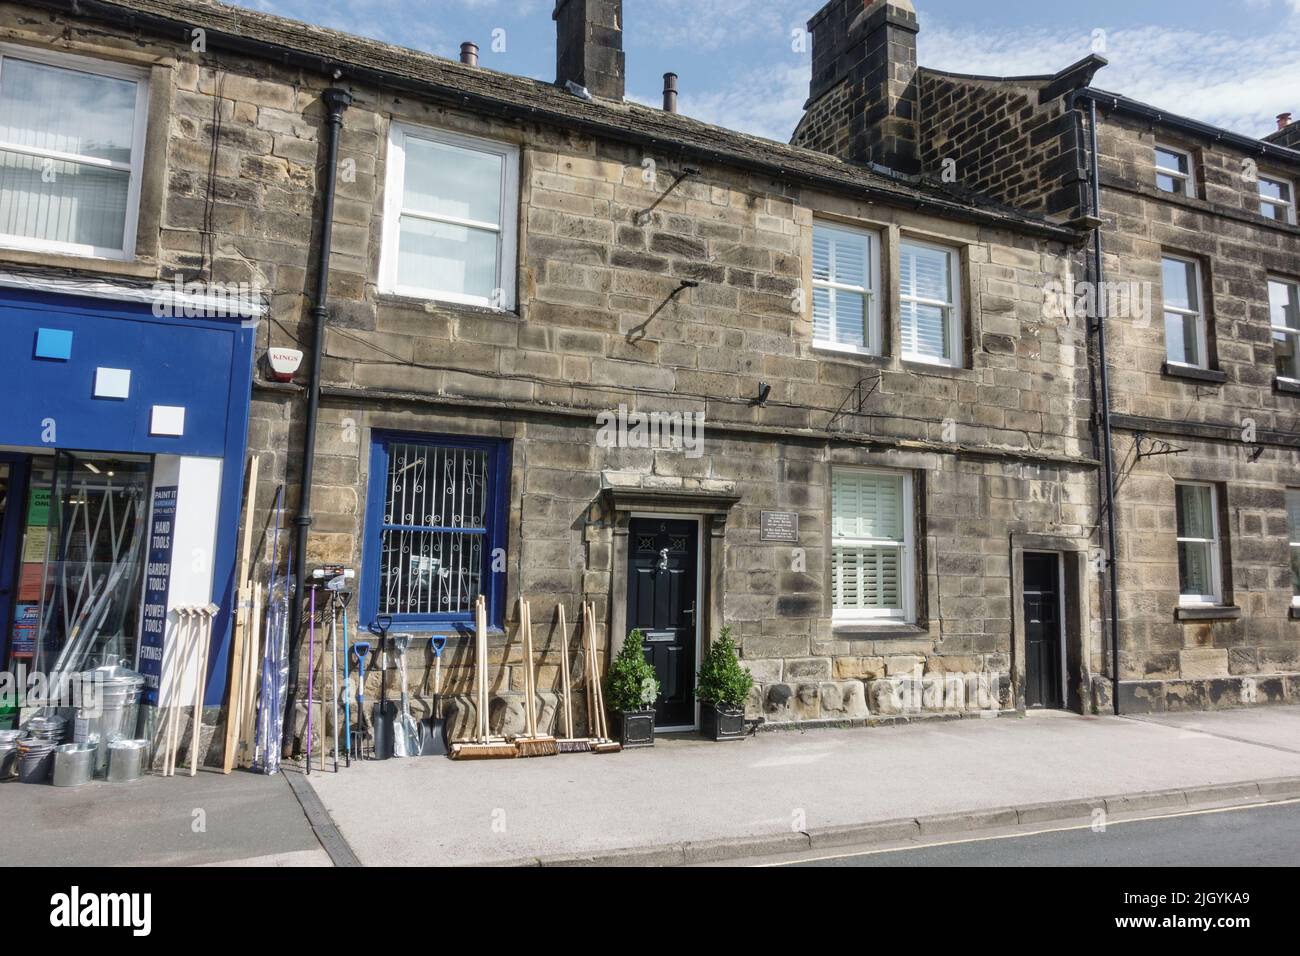 The former home of Dr John Ritchie (died 1780) in Otley, West Yorkshire, UK. Stock Photo